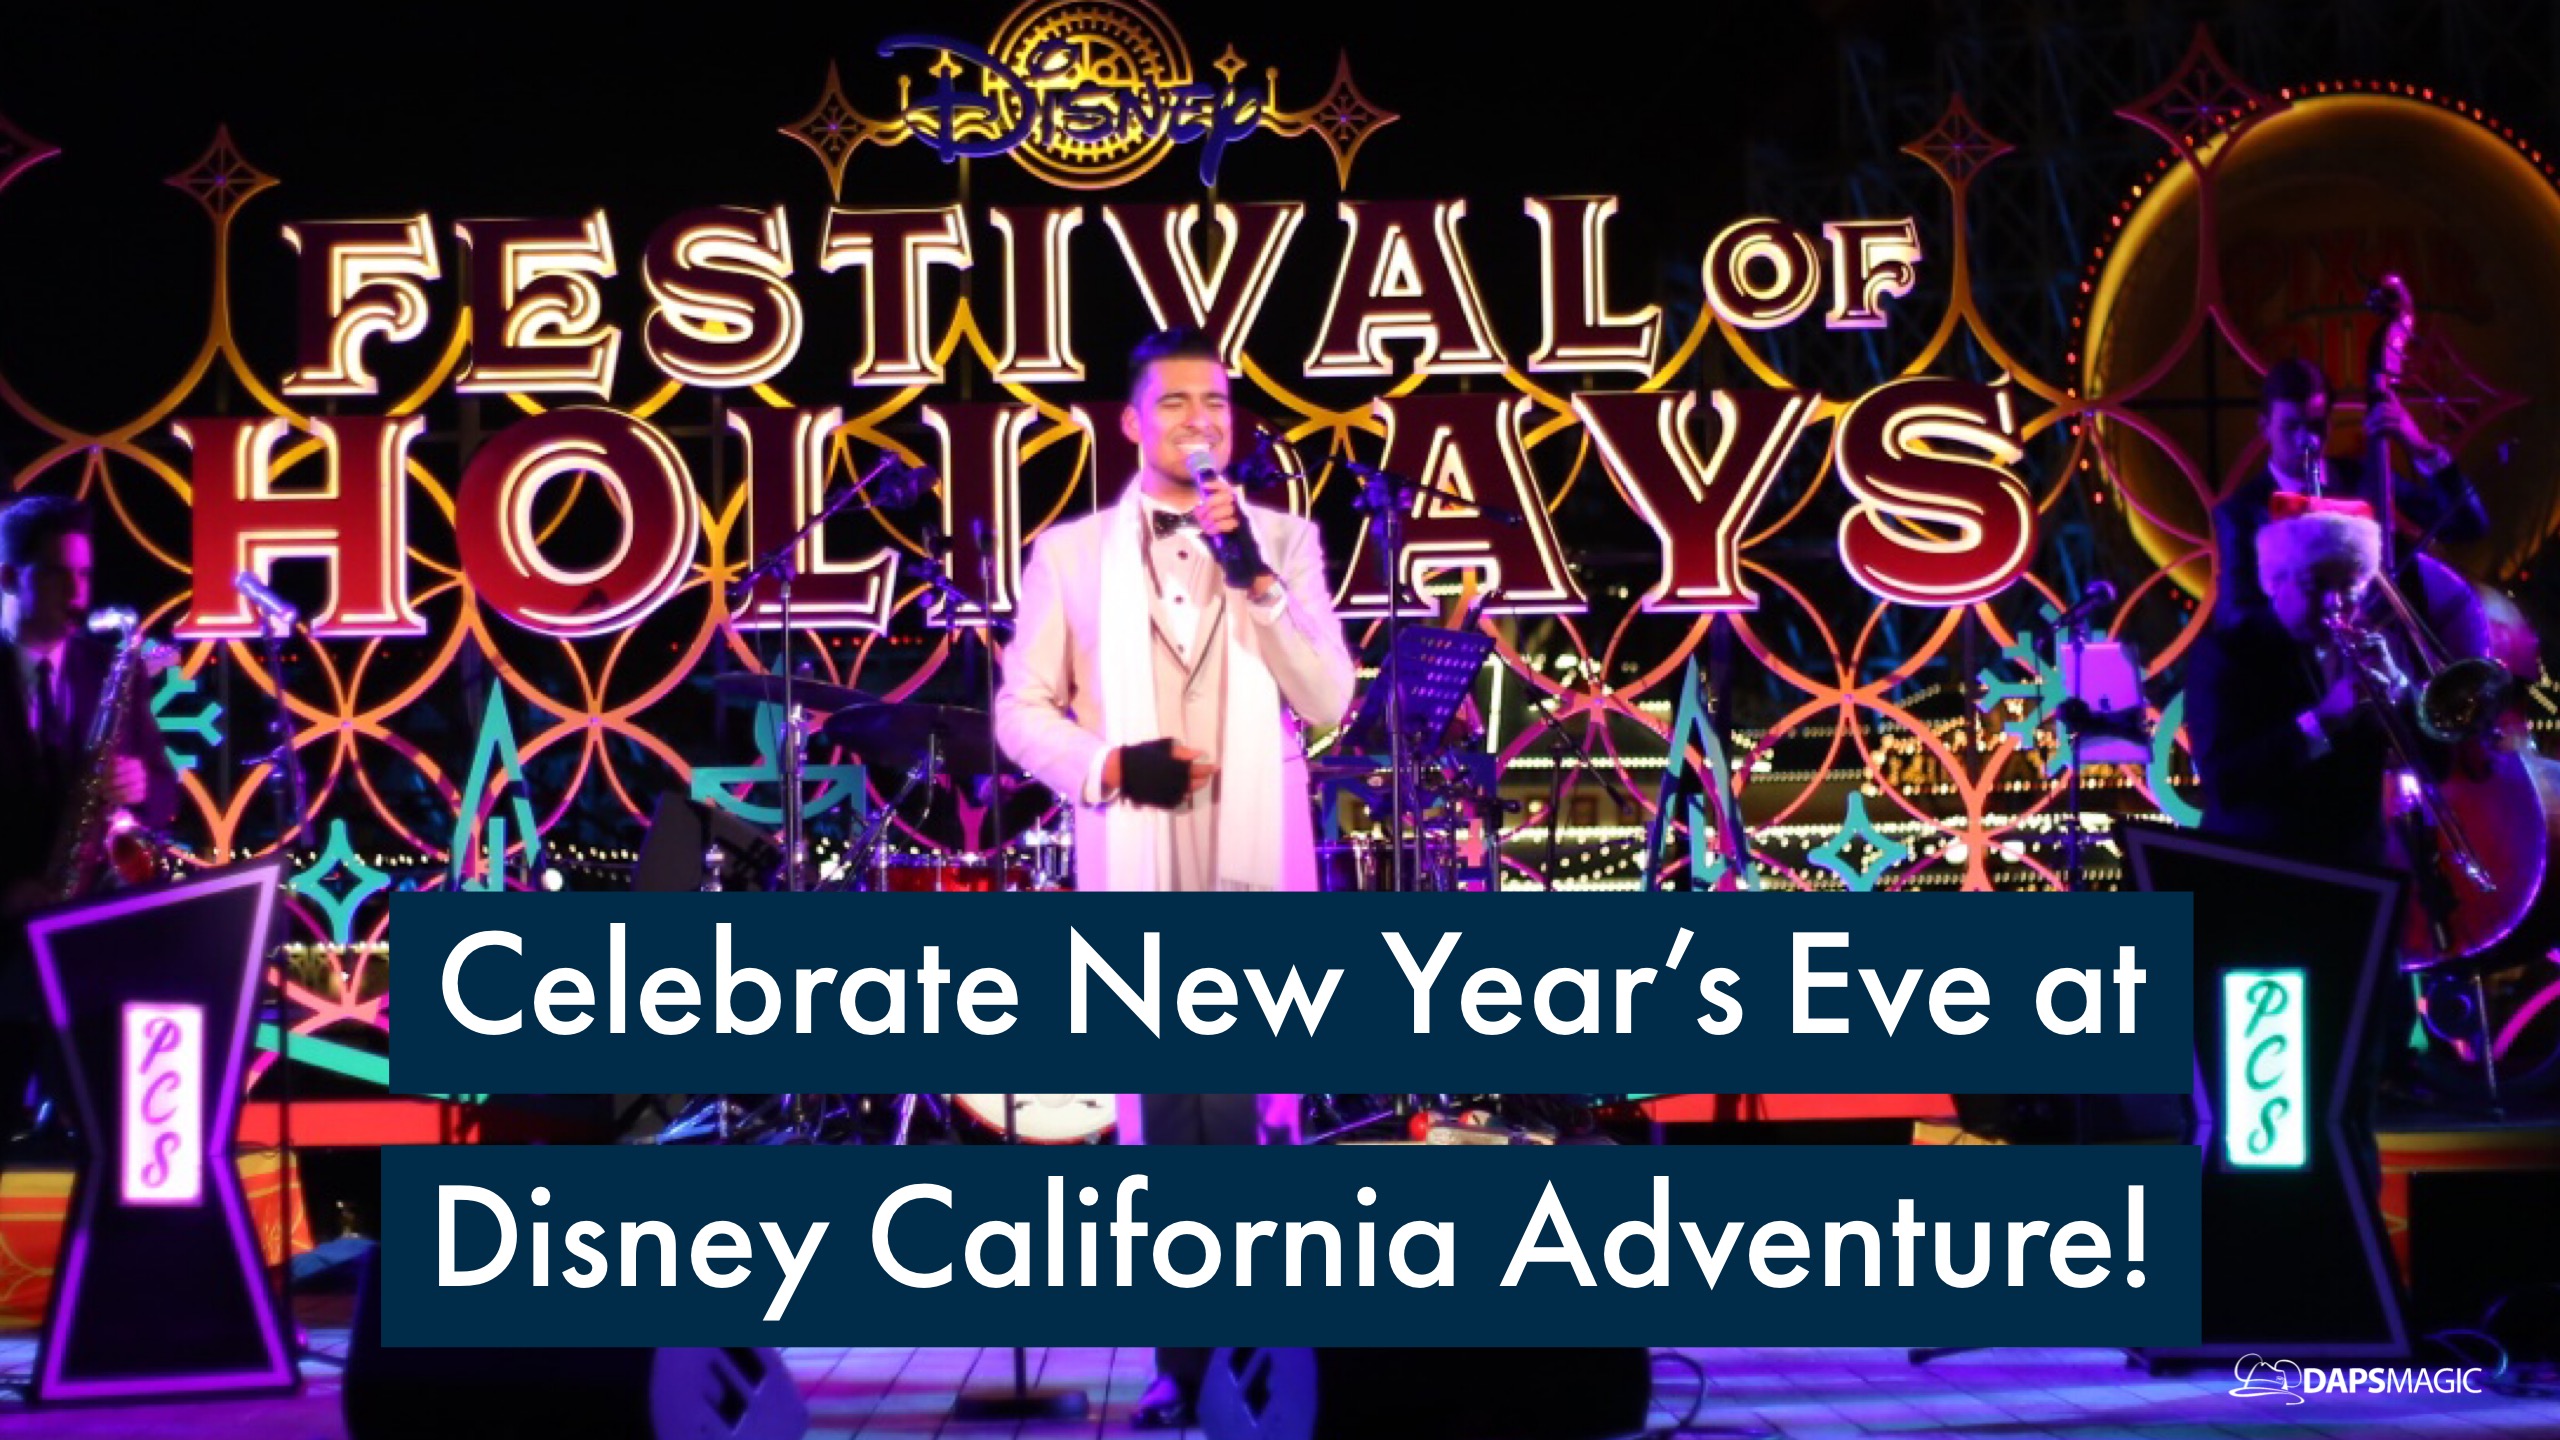 Ring in the New Year at Disney California Adventure!